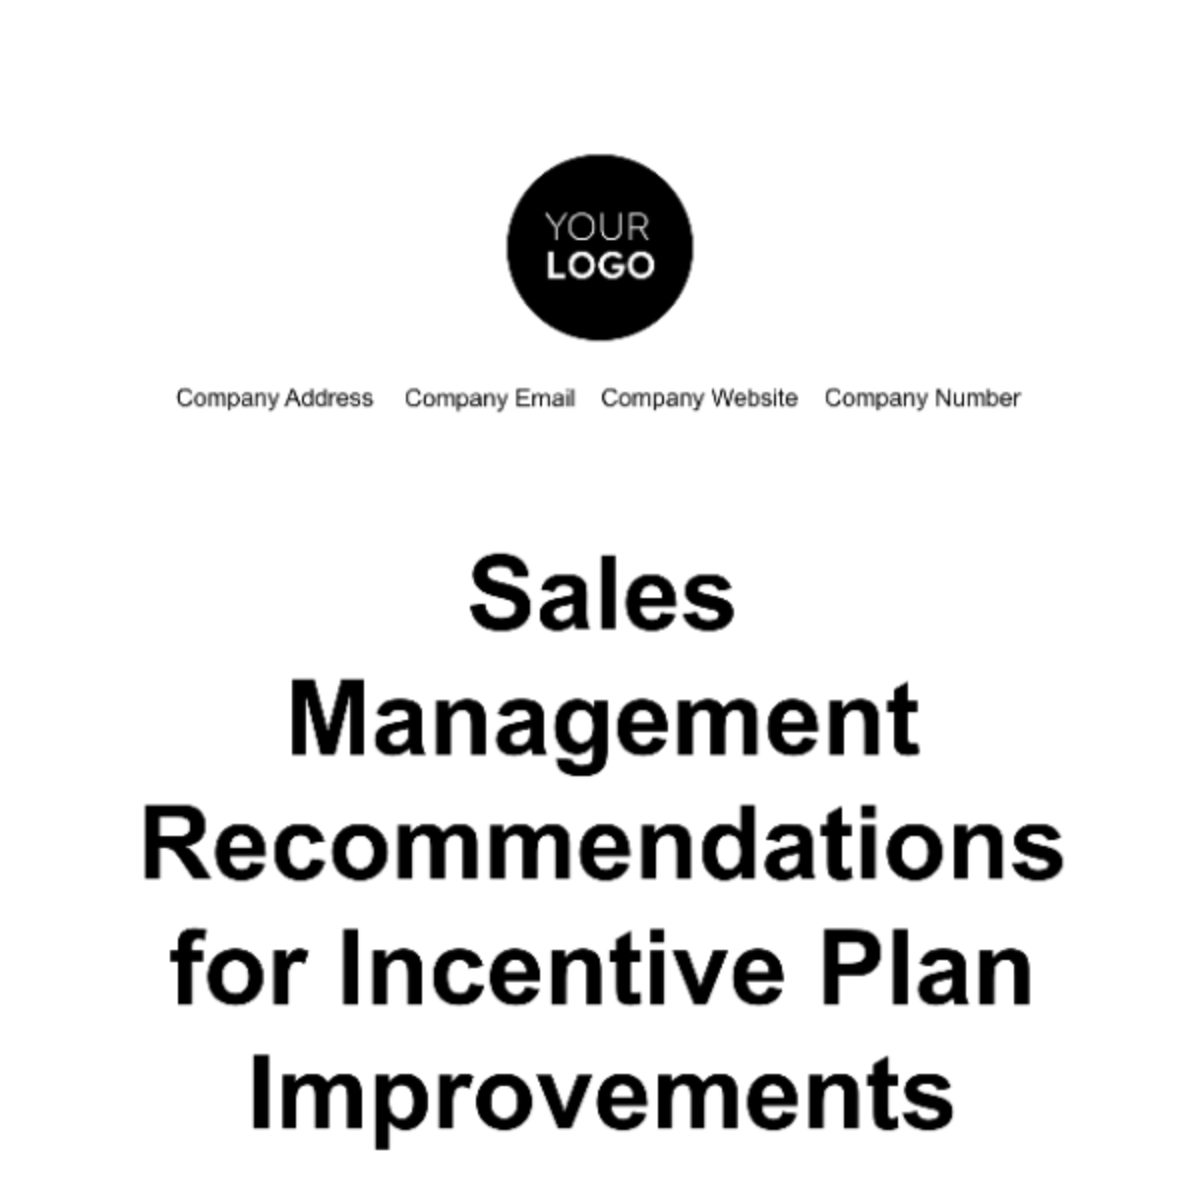 Sales Management Recommendations for Incentive Plan Improvements Template